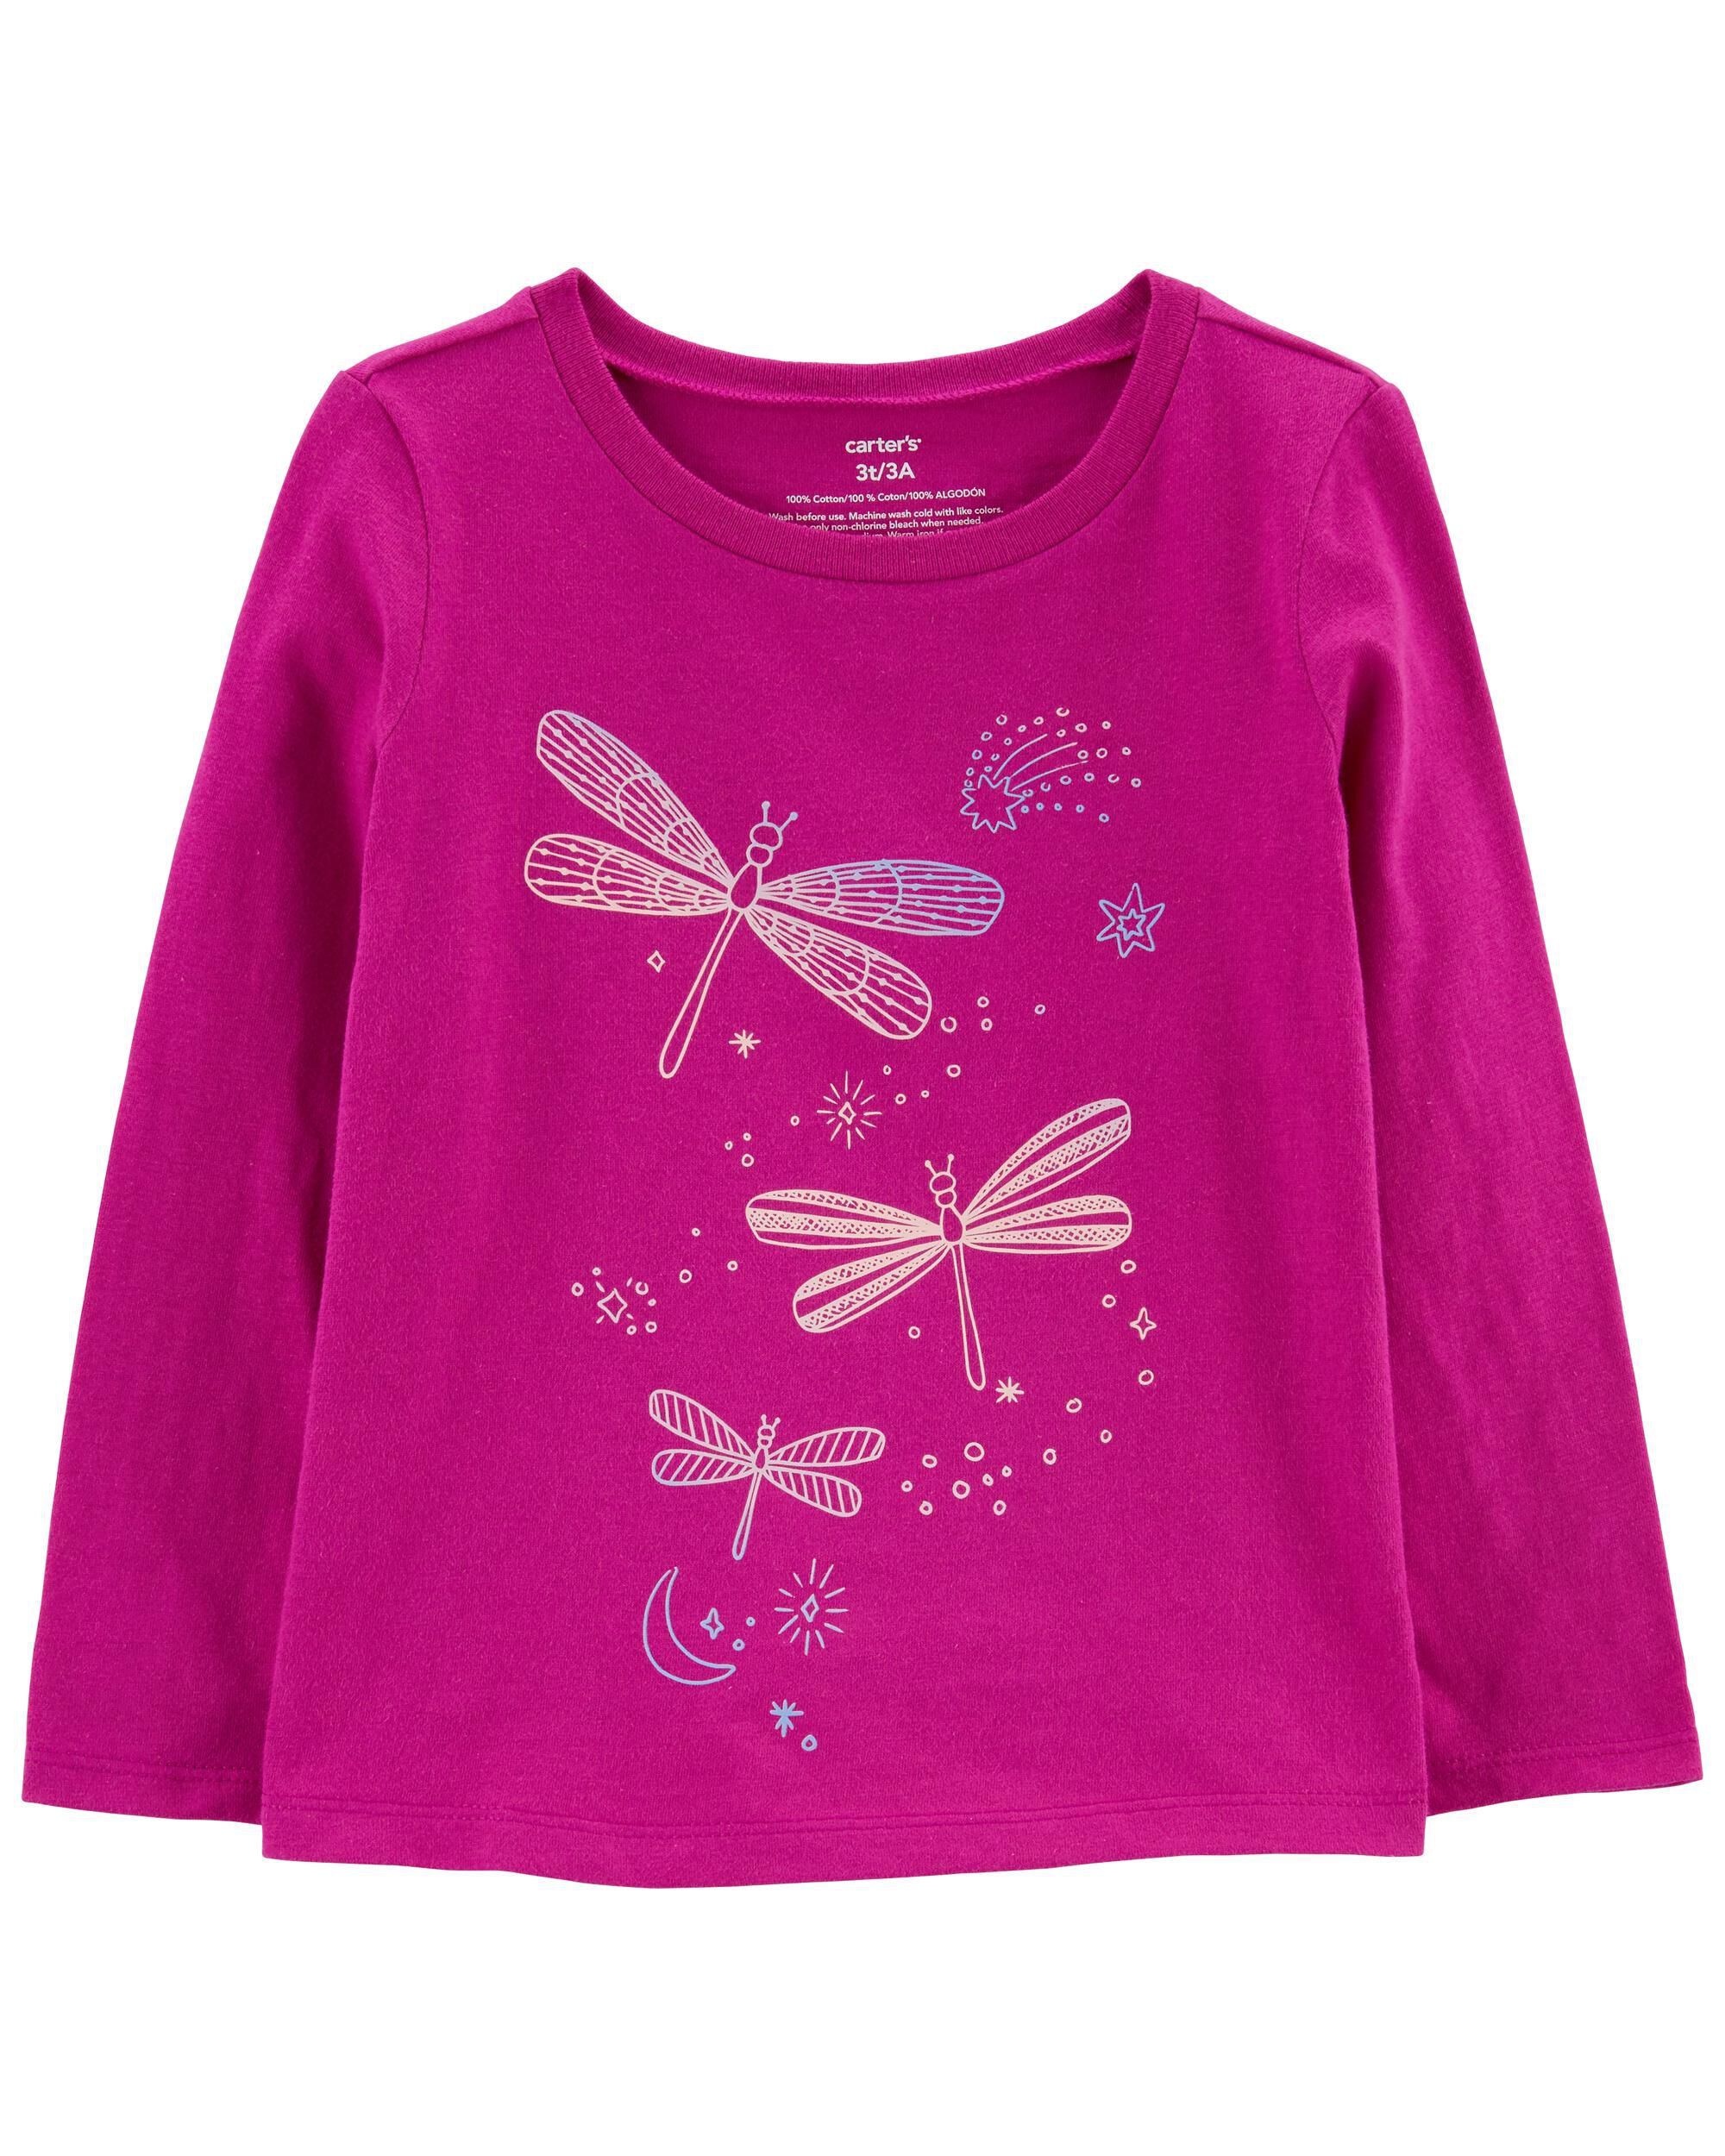 Carters Kid Dragonfly Jersey Tee